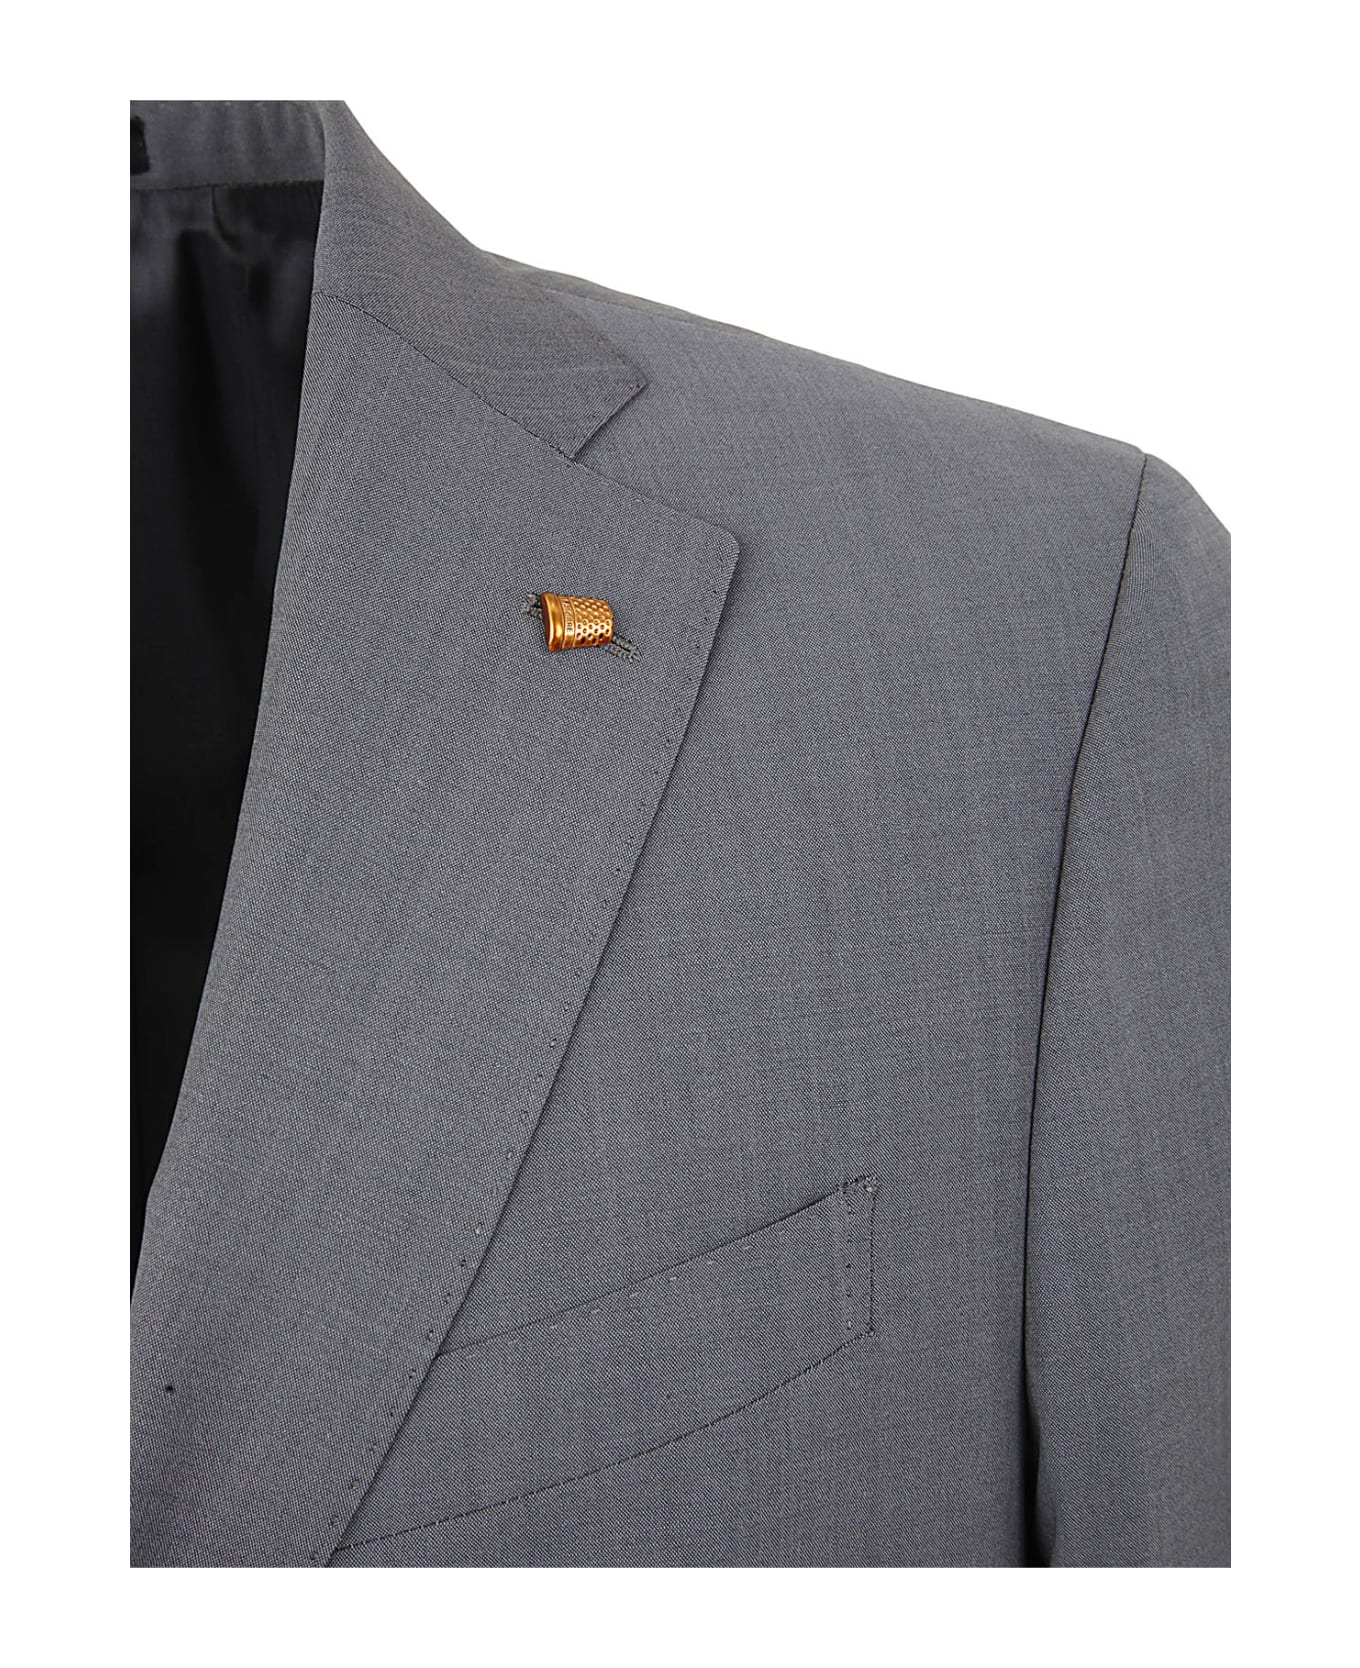 Sartoria Latorre Suit With Two Buttons - Lead スーツ